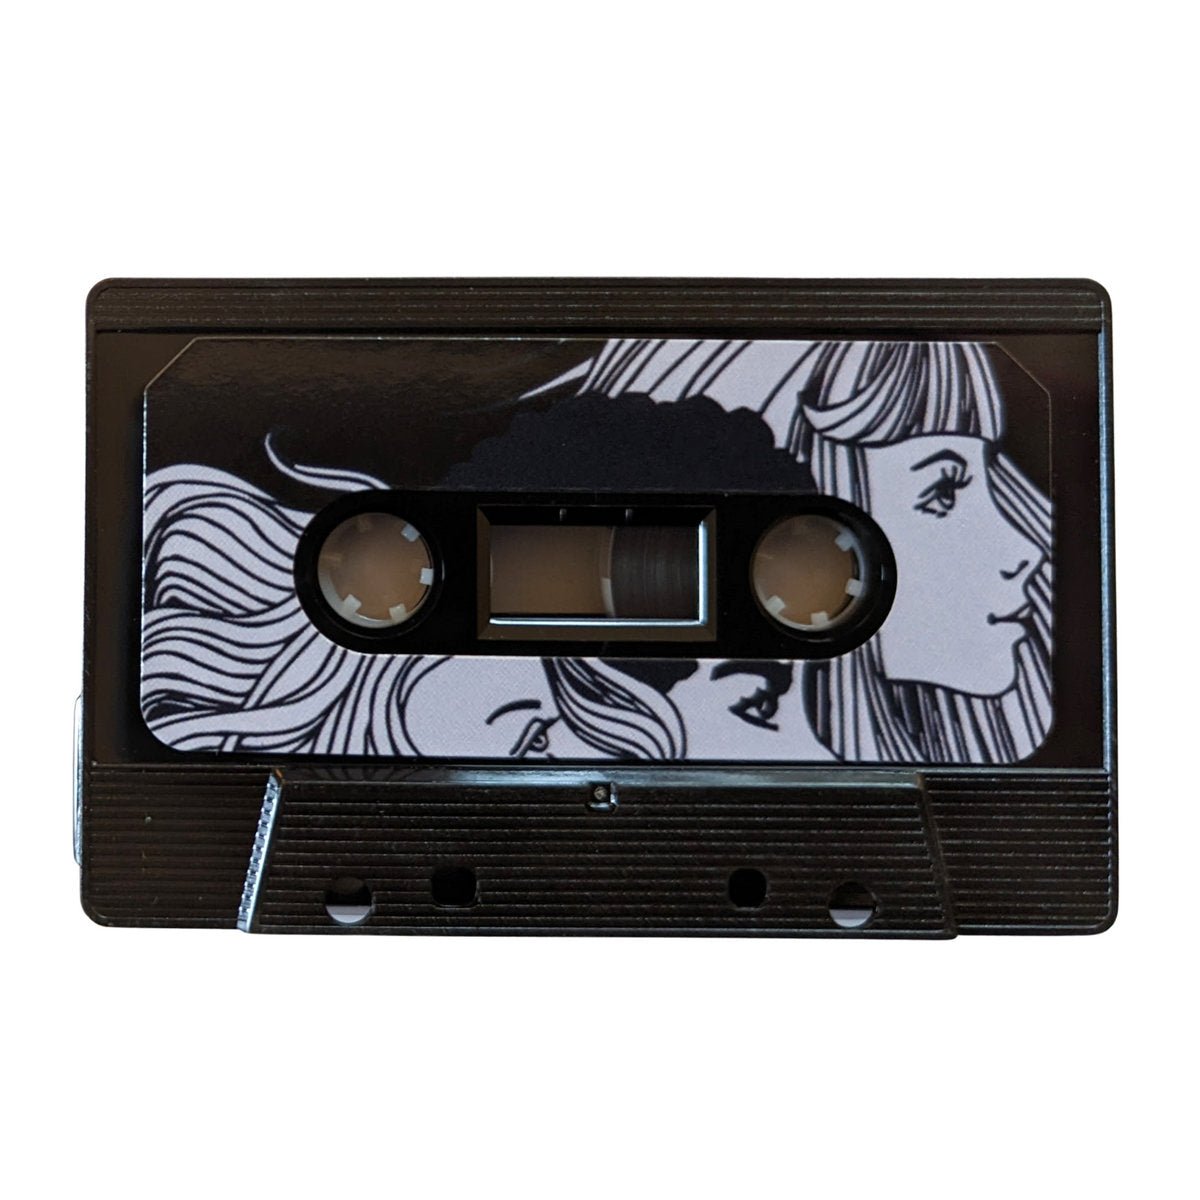 MichRyc - Under The Surface - Limited Edition Cassette - Cold Busted